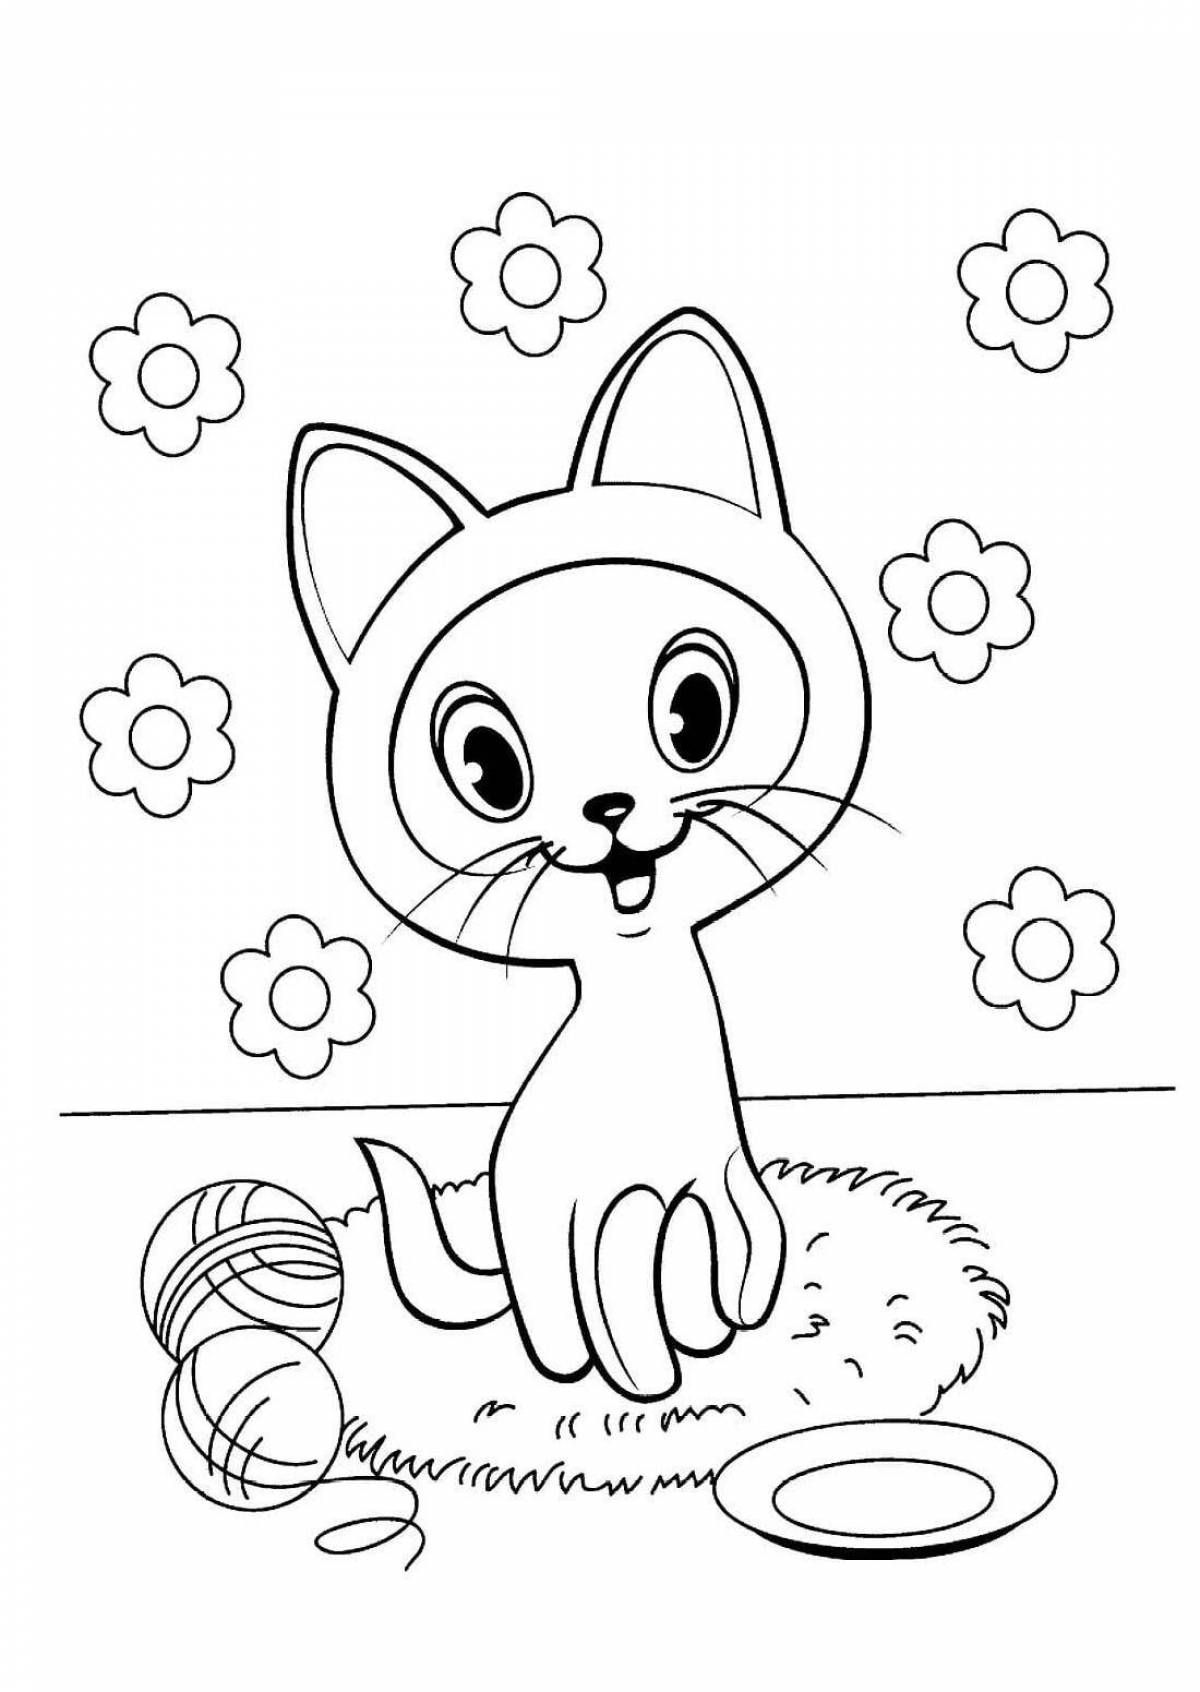 Colorful kitten coloring book